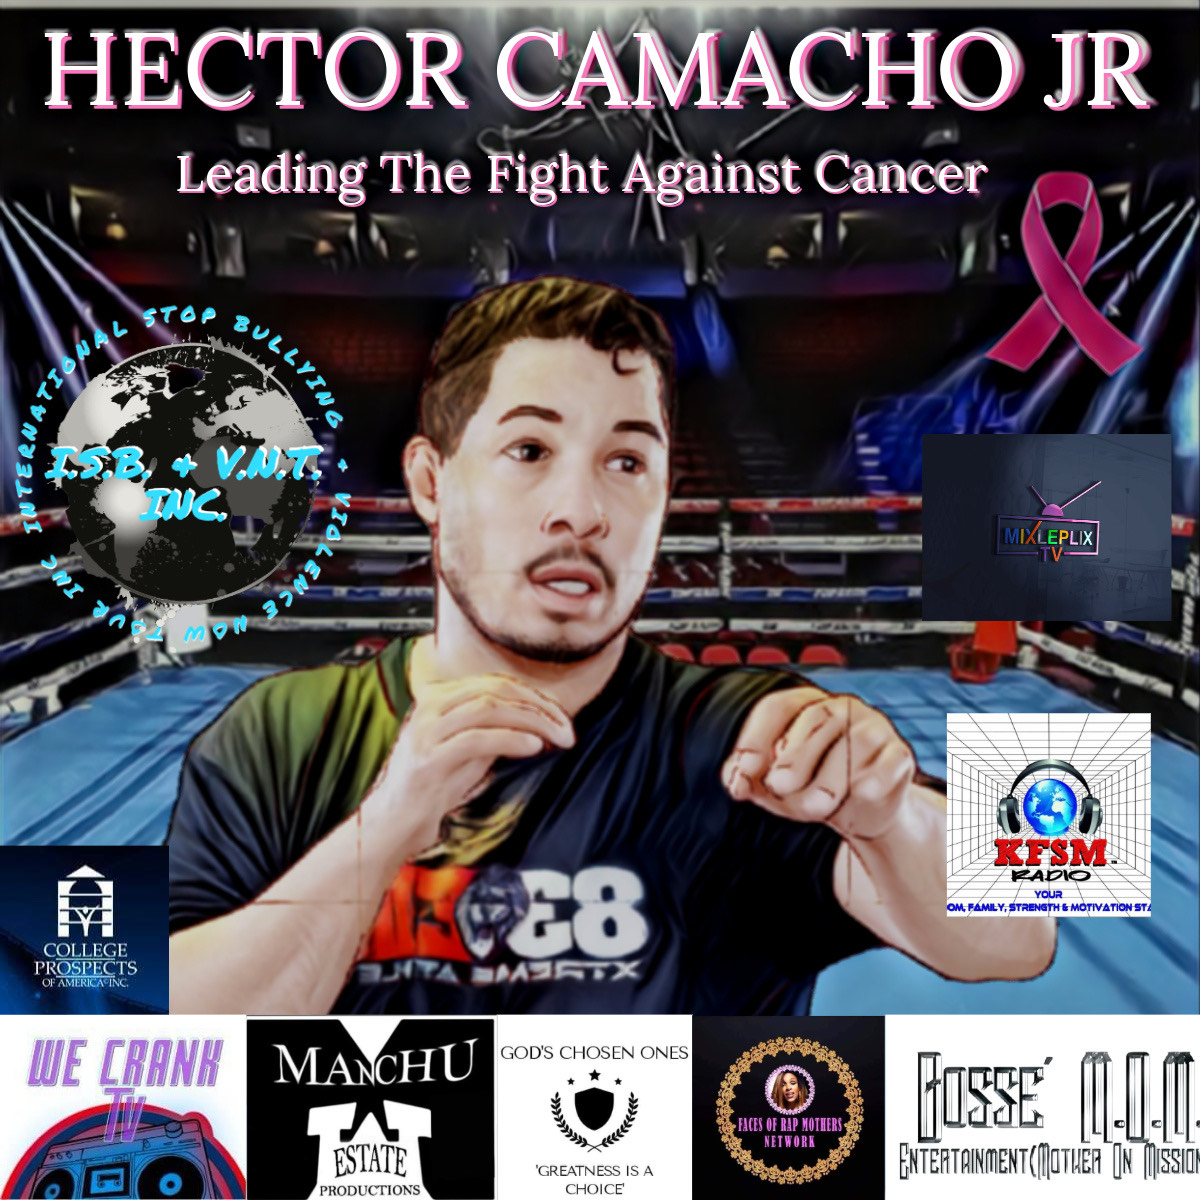 Professional Boxer Hector Camacho Jr. Returns to the Ring Against Rob Emerson on June 15th in Destin, Florida